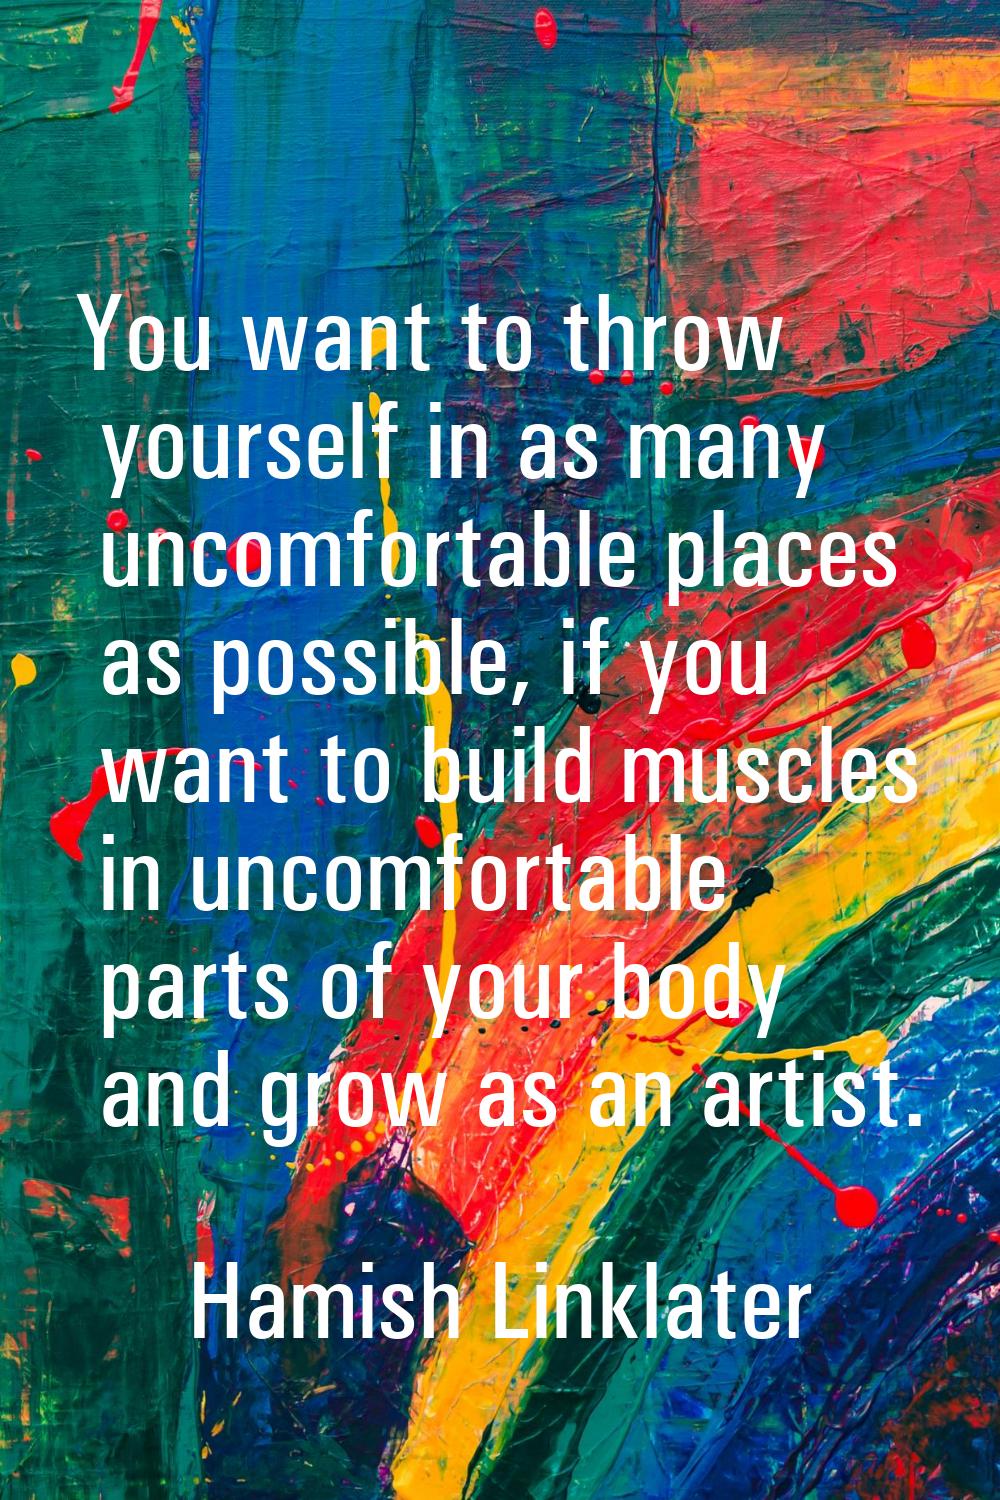 You want to throw yourself in as many uncomfortable places as possible, if you want to build muscle